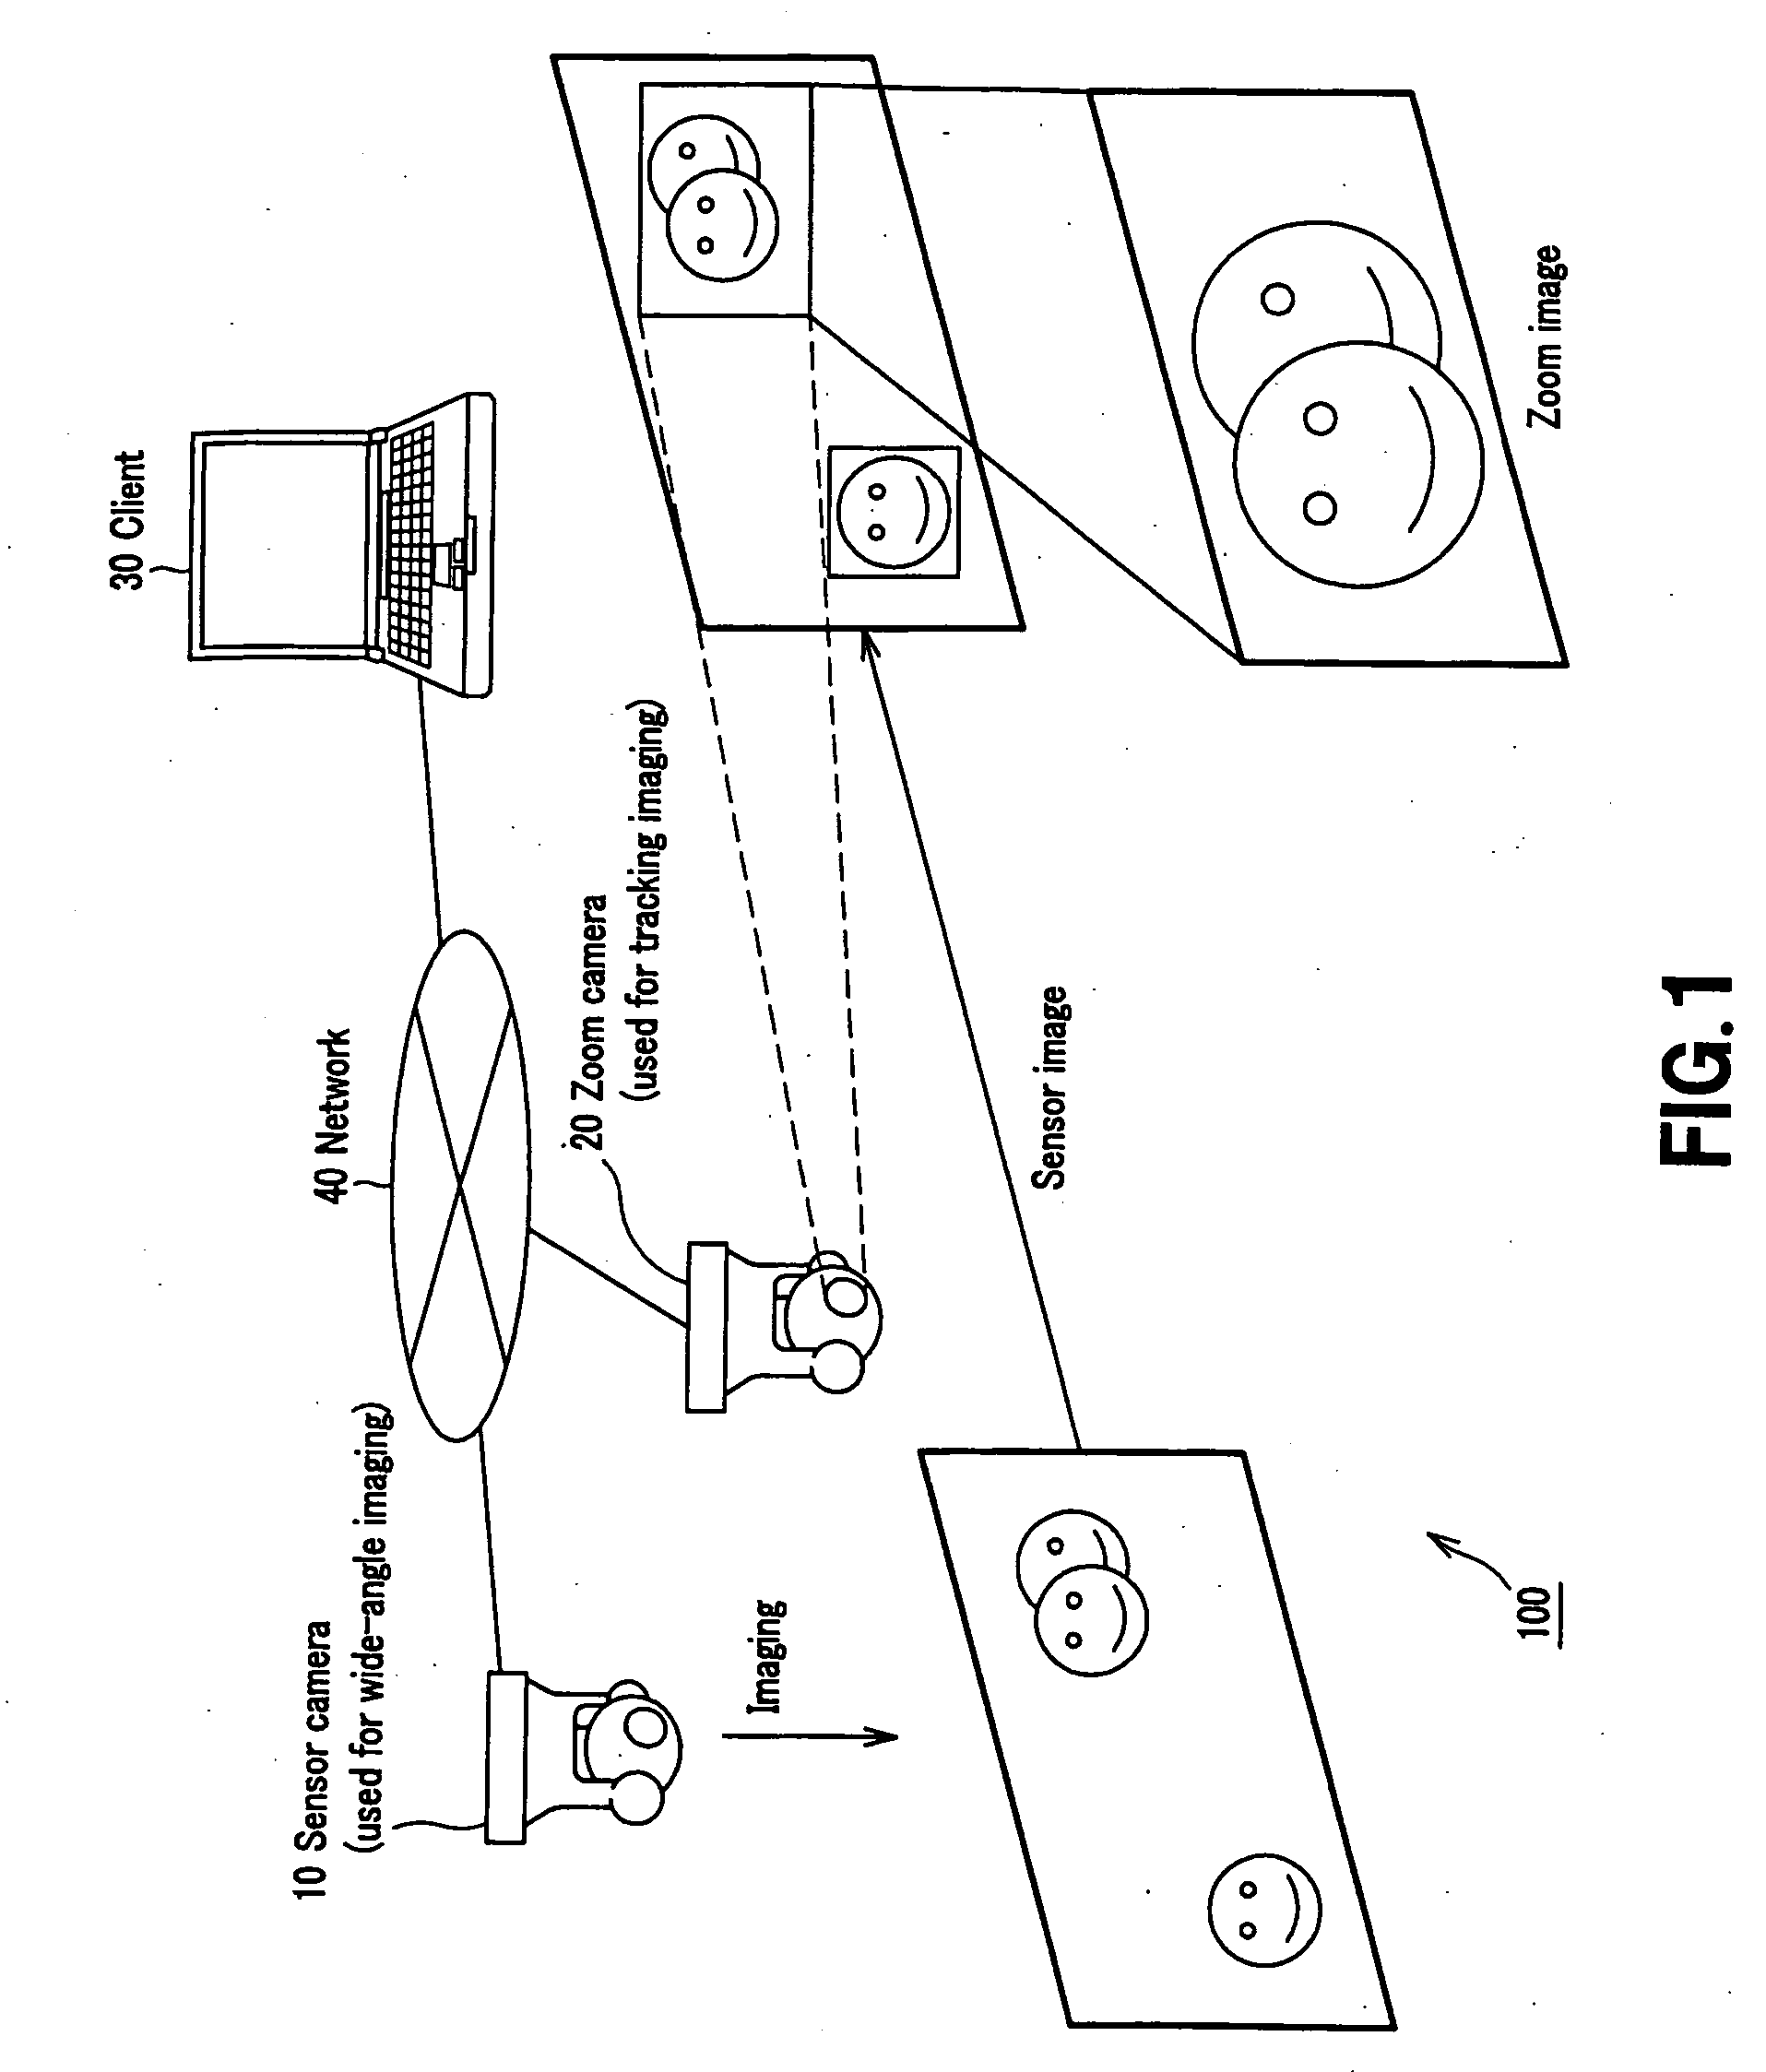 Imaging system and imaging method